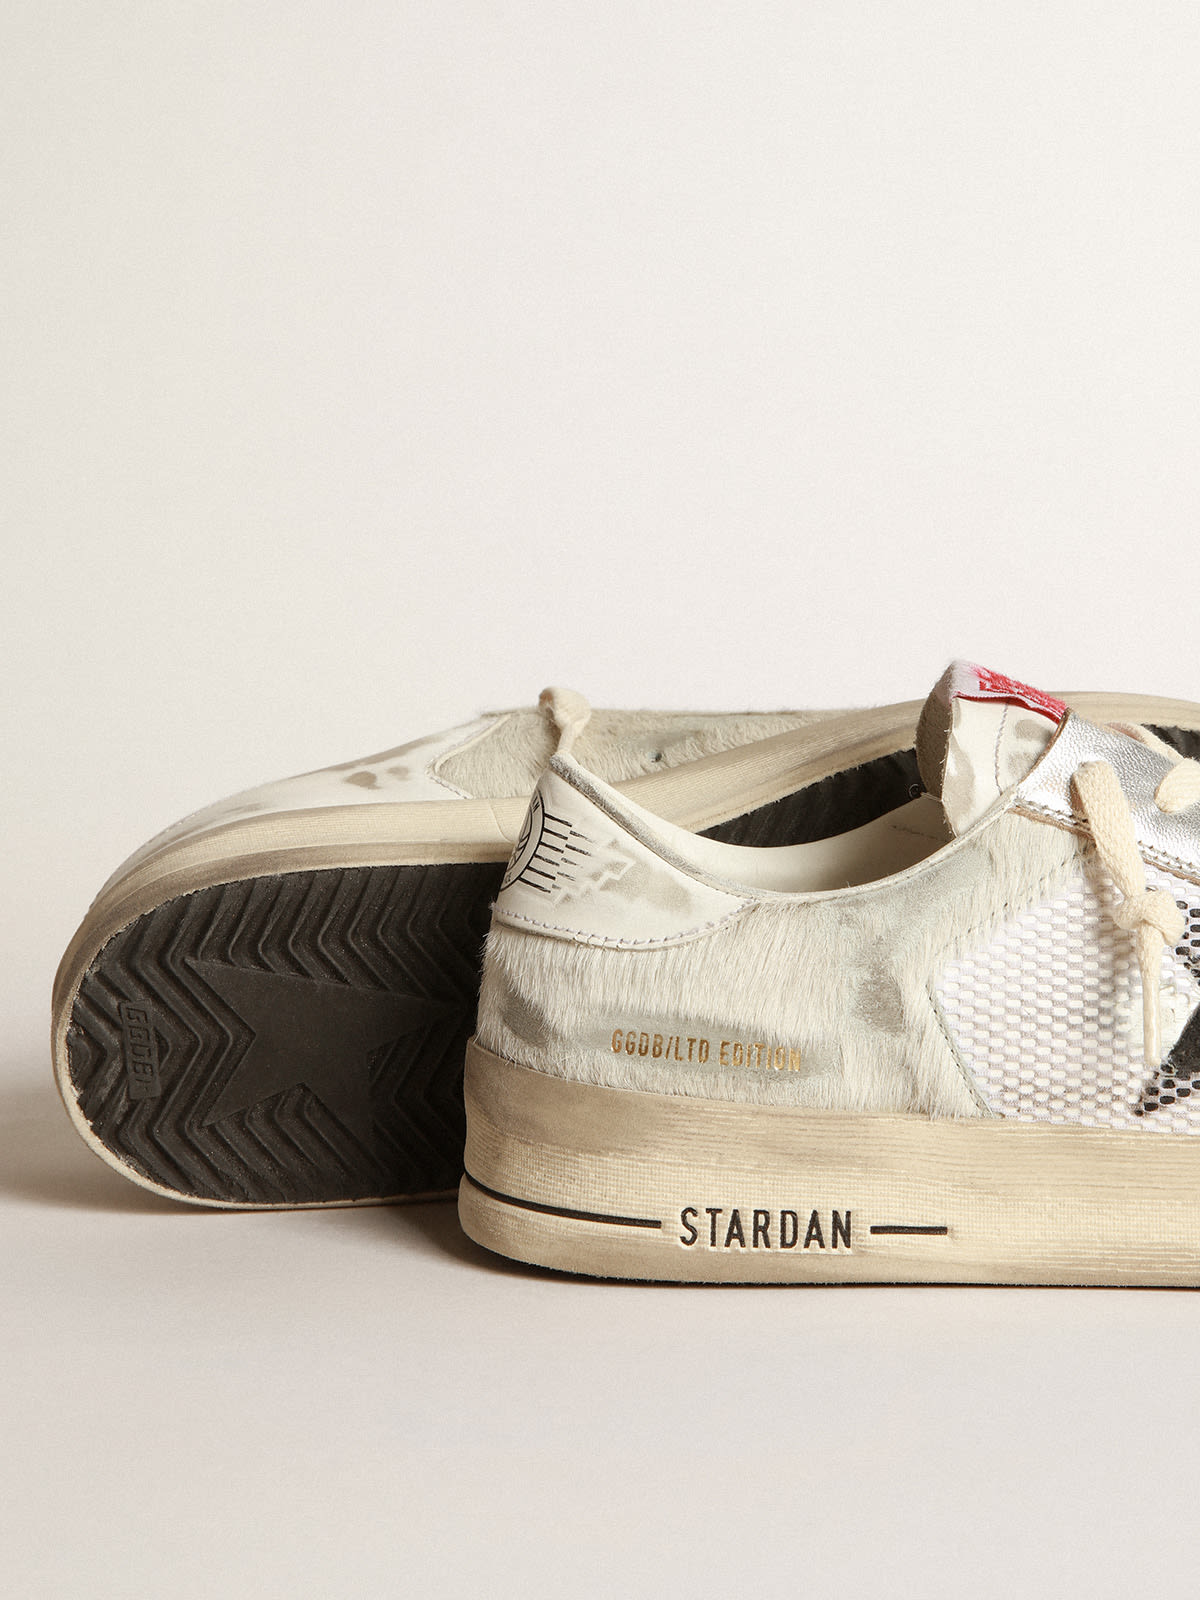 Golden Goose - Stardan LAB sneakers in white pony skin and leather with black suede star in 